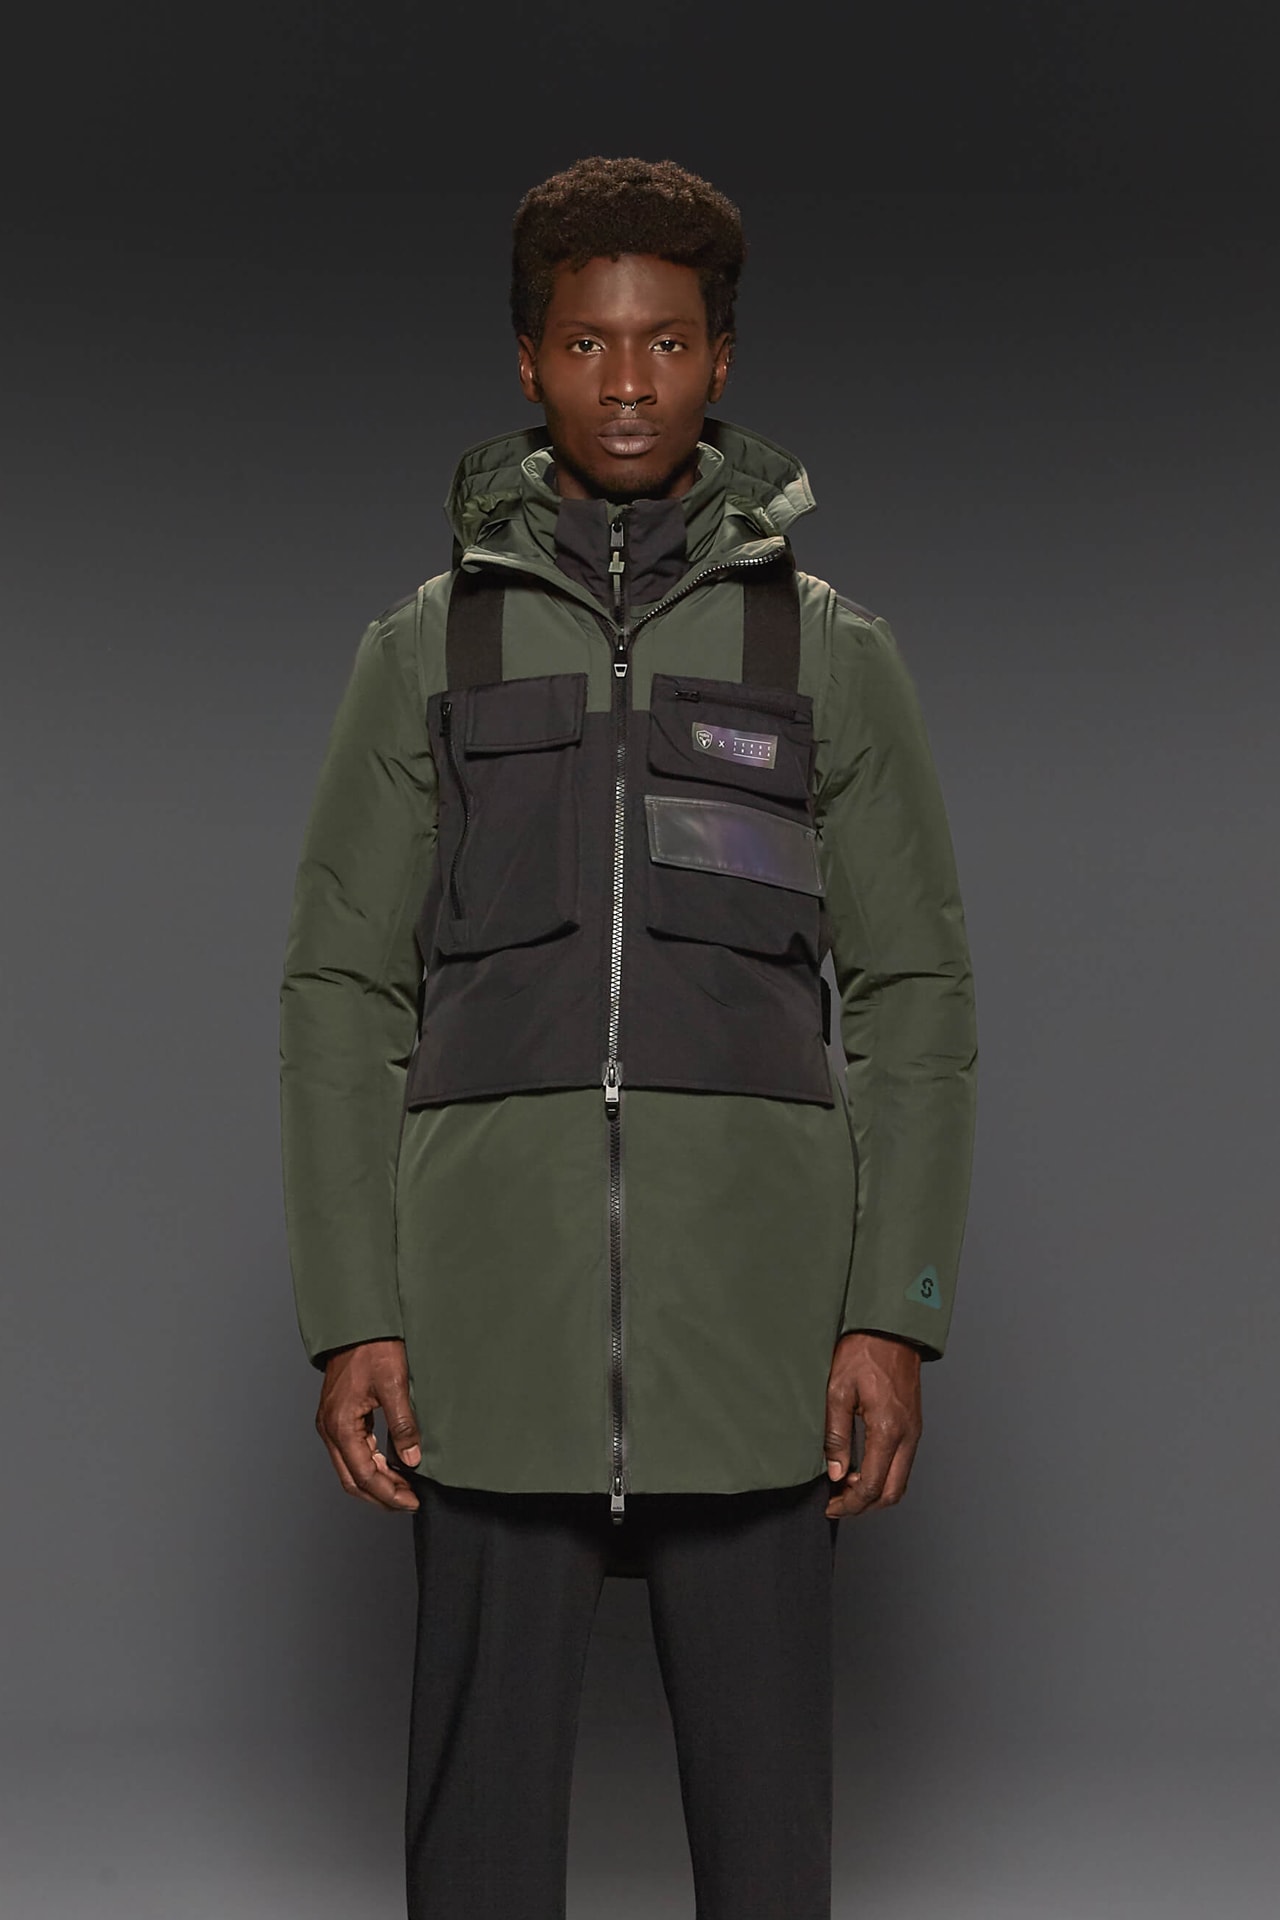 Serge Ibaka design parka, anorak, bomber jacket, vests, hats and scarves, patented membrane lamination, seam-sealed construction, Canadian origin white duck down, Reflective trims, iridescent logos, water repellent nylon shell, Fall/Winter season, big scarf energy